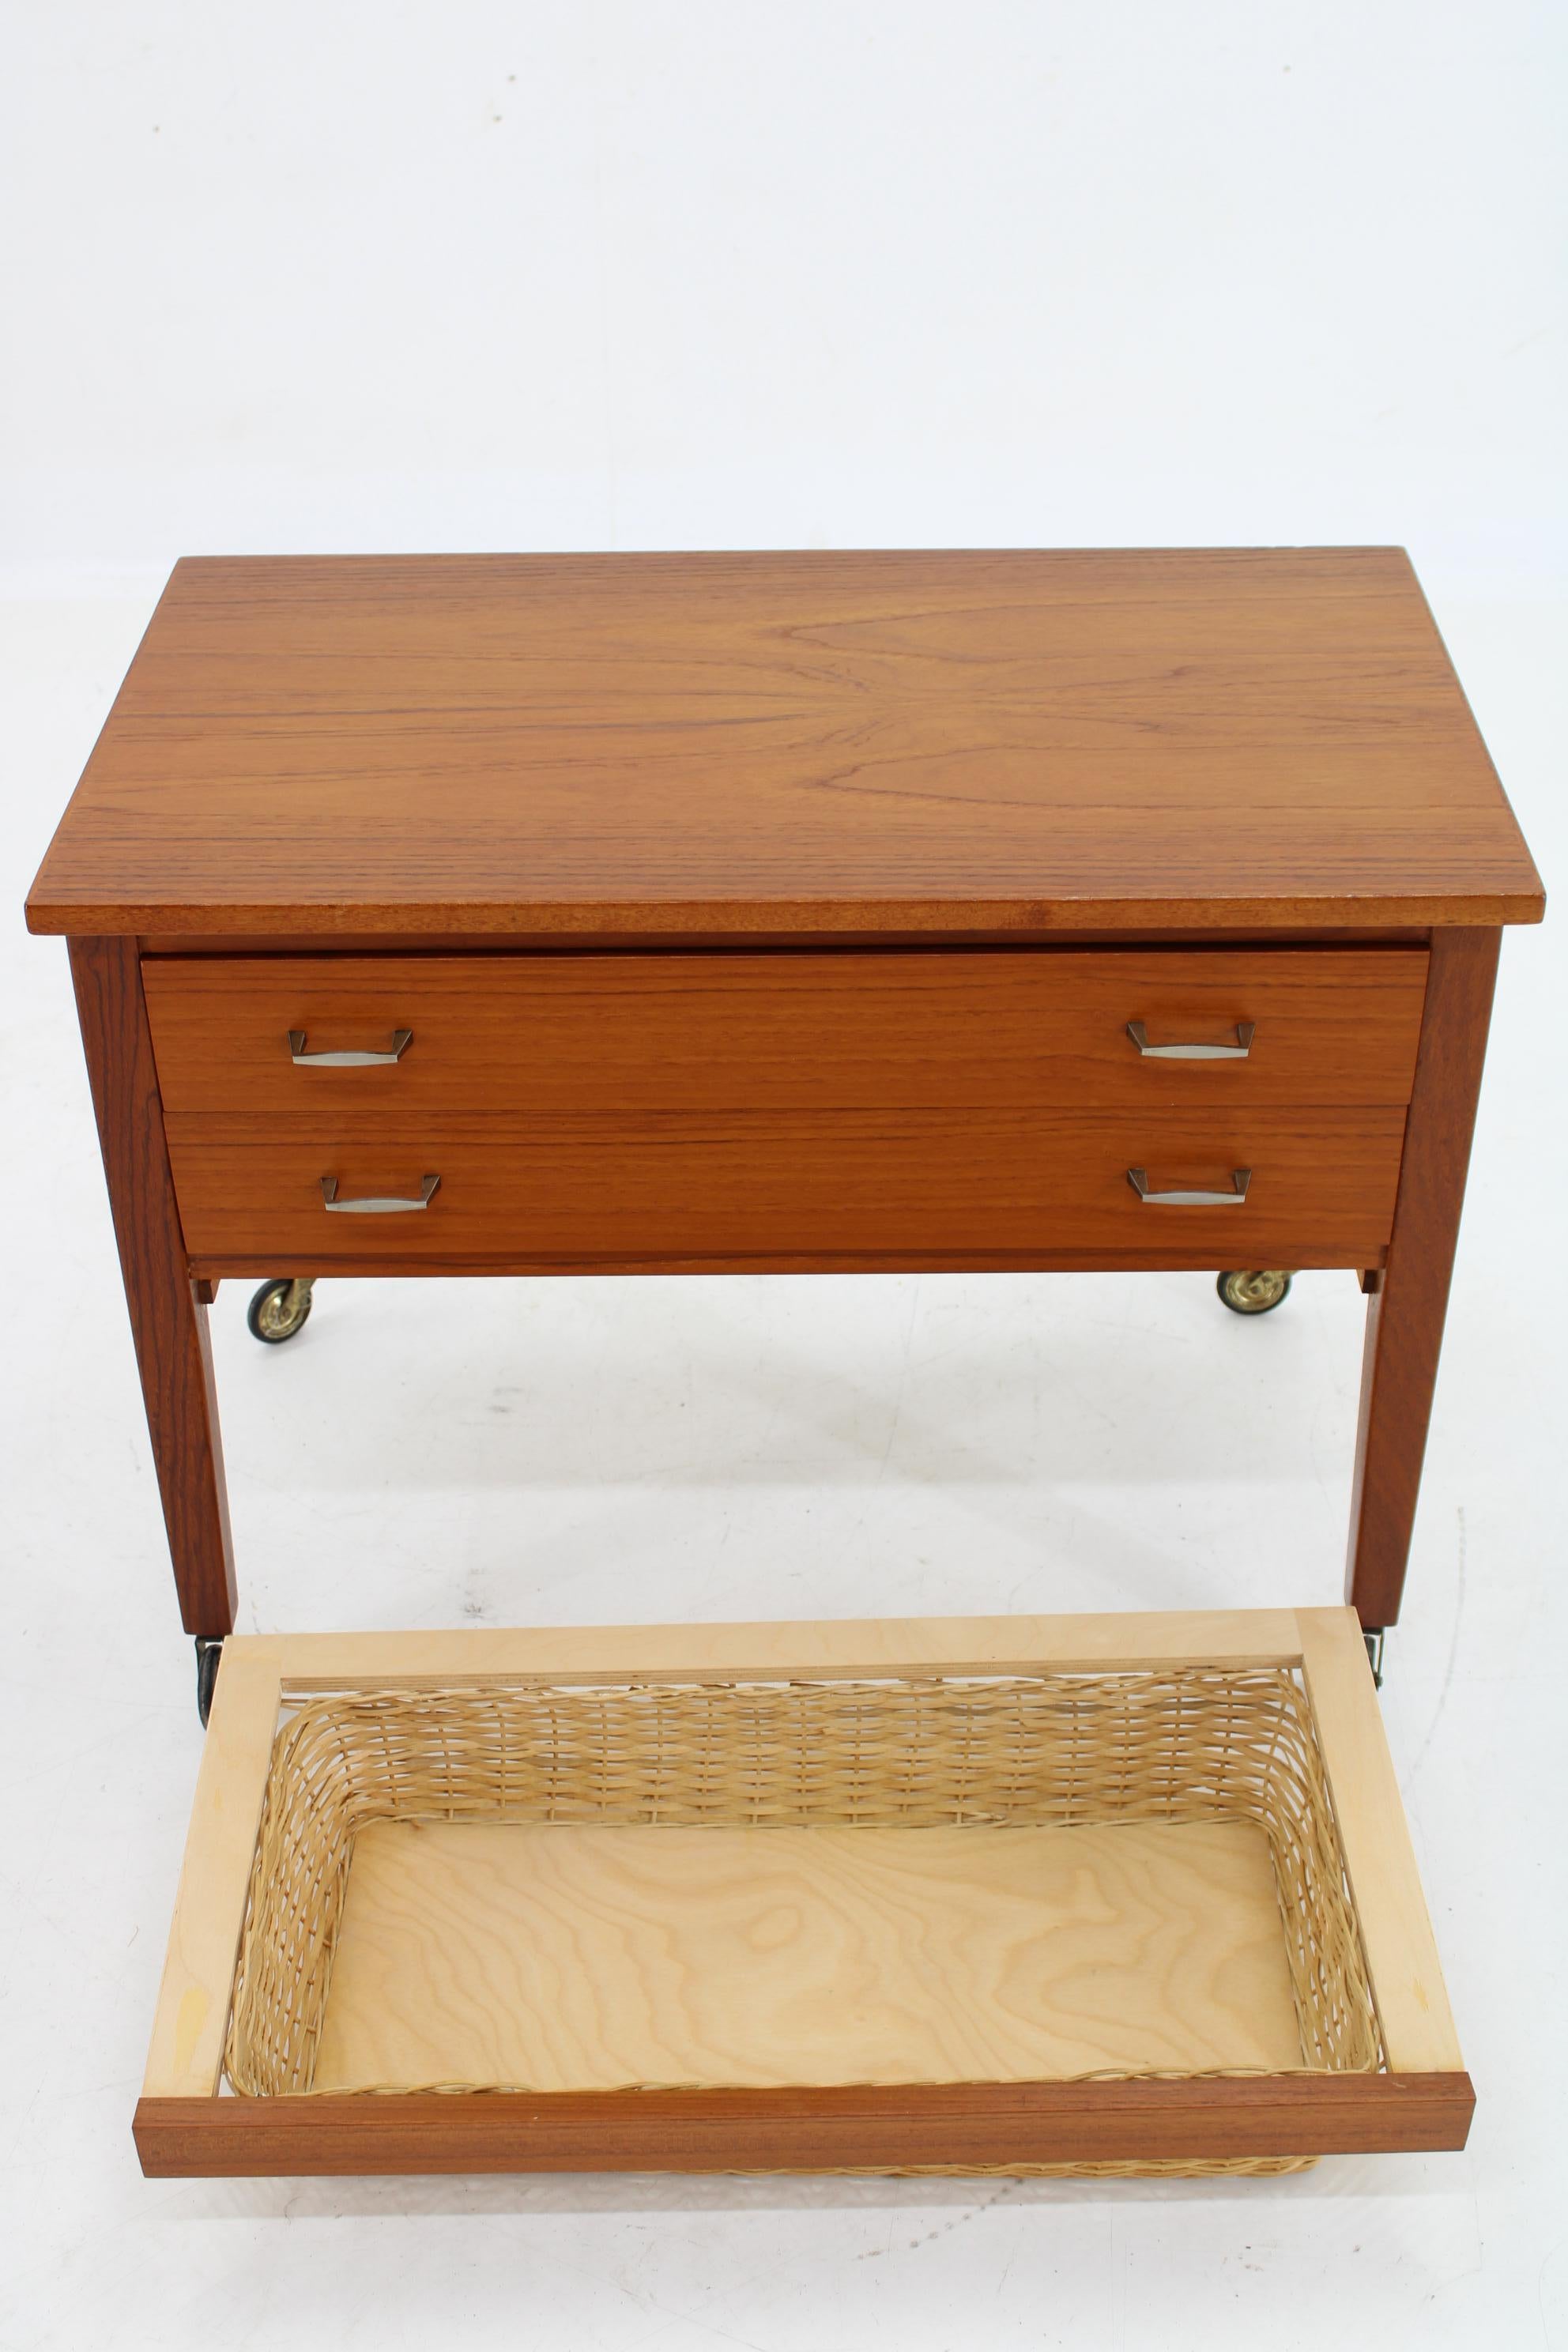 1960s Danish Teak Sewing Table with Drawers For Sale 3